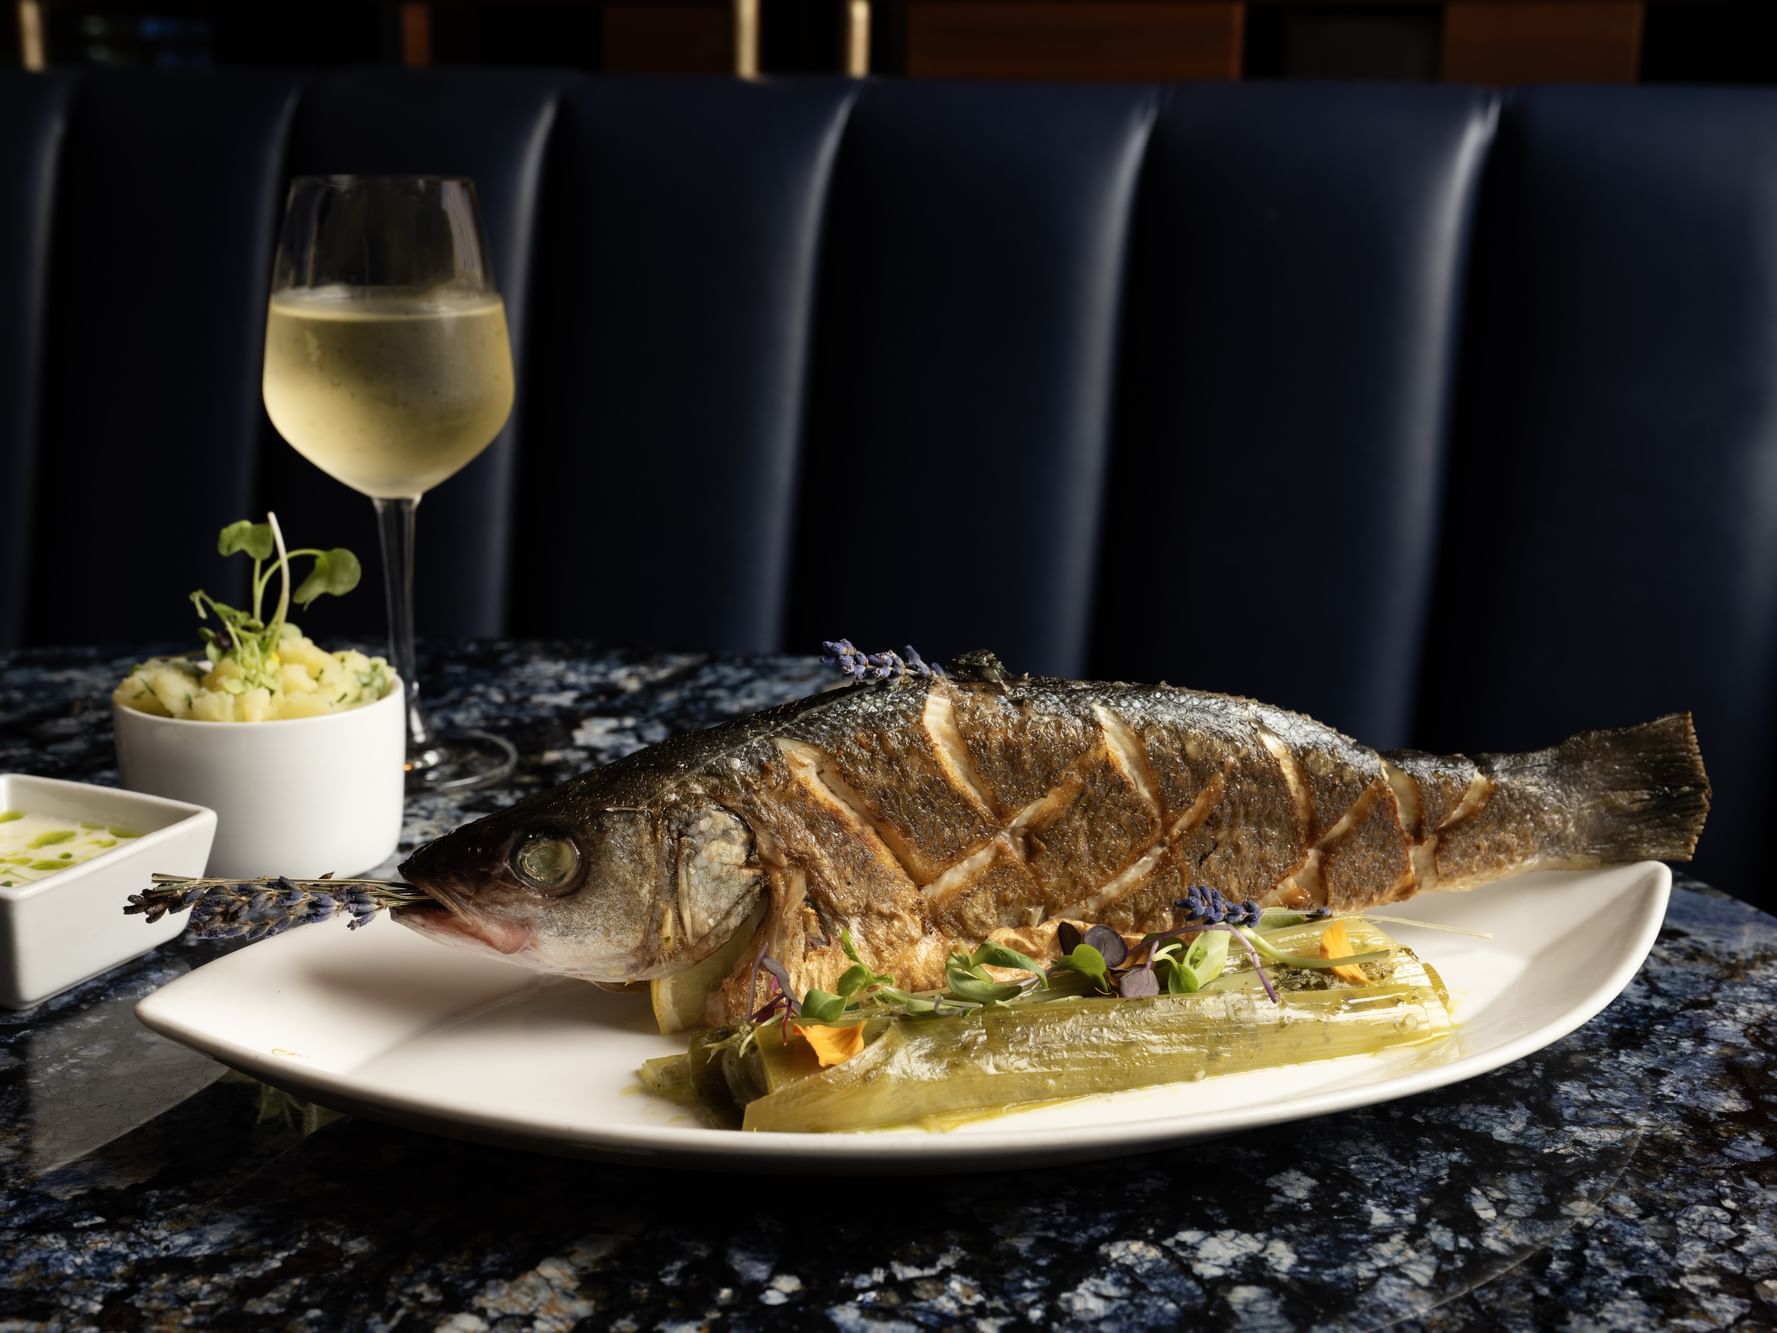 Branzino on a plate with a glass of white wine next to it